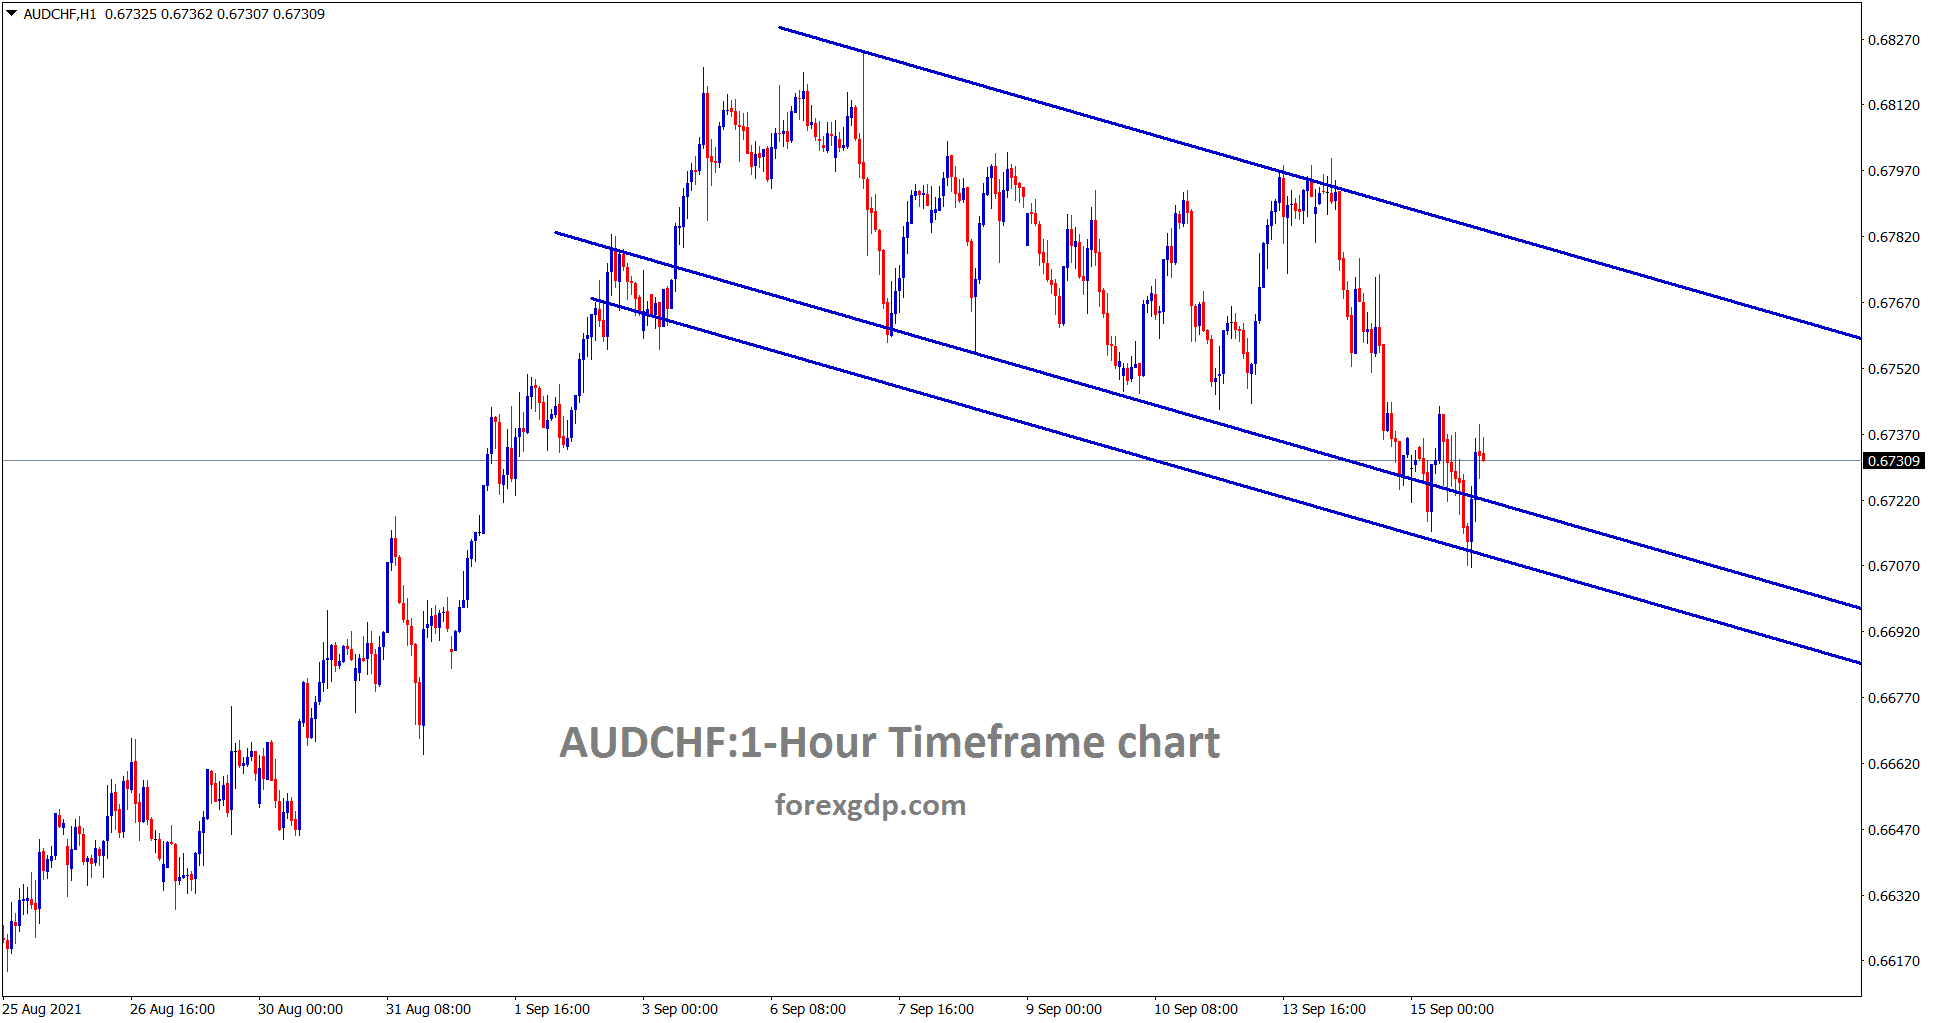 AUDCHF is moving in a descending channel range